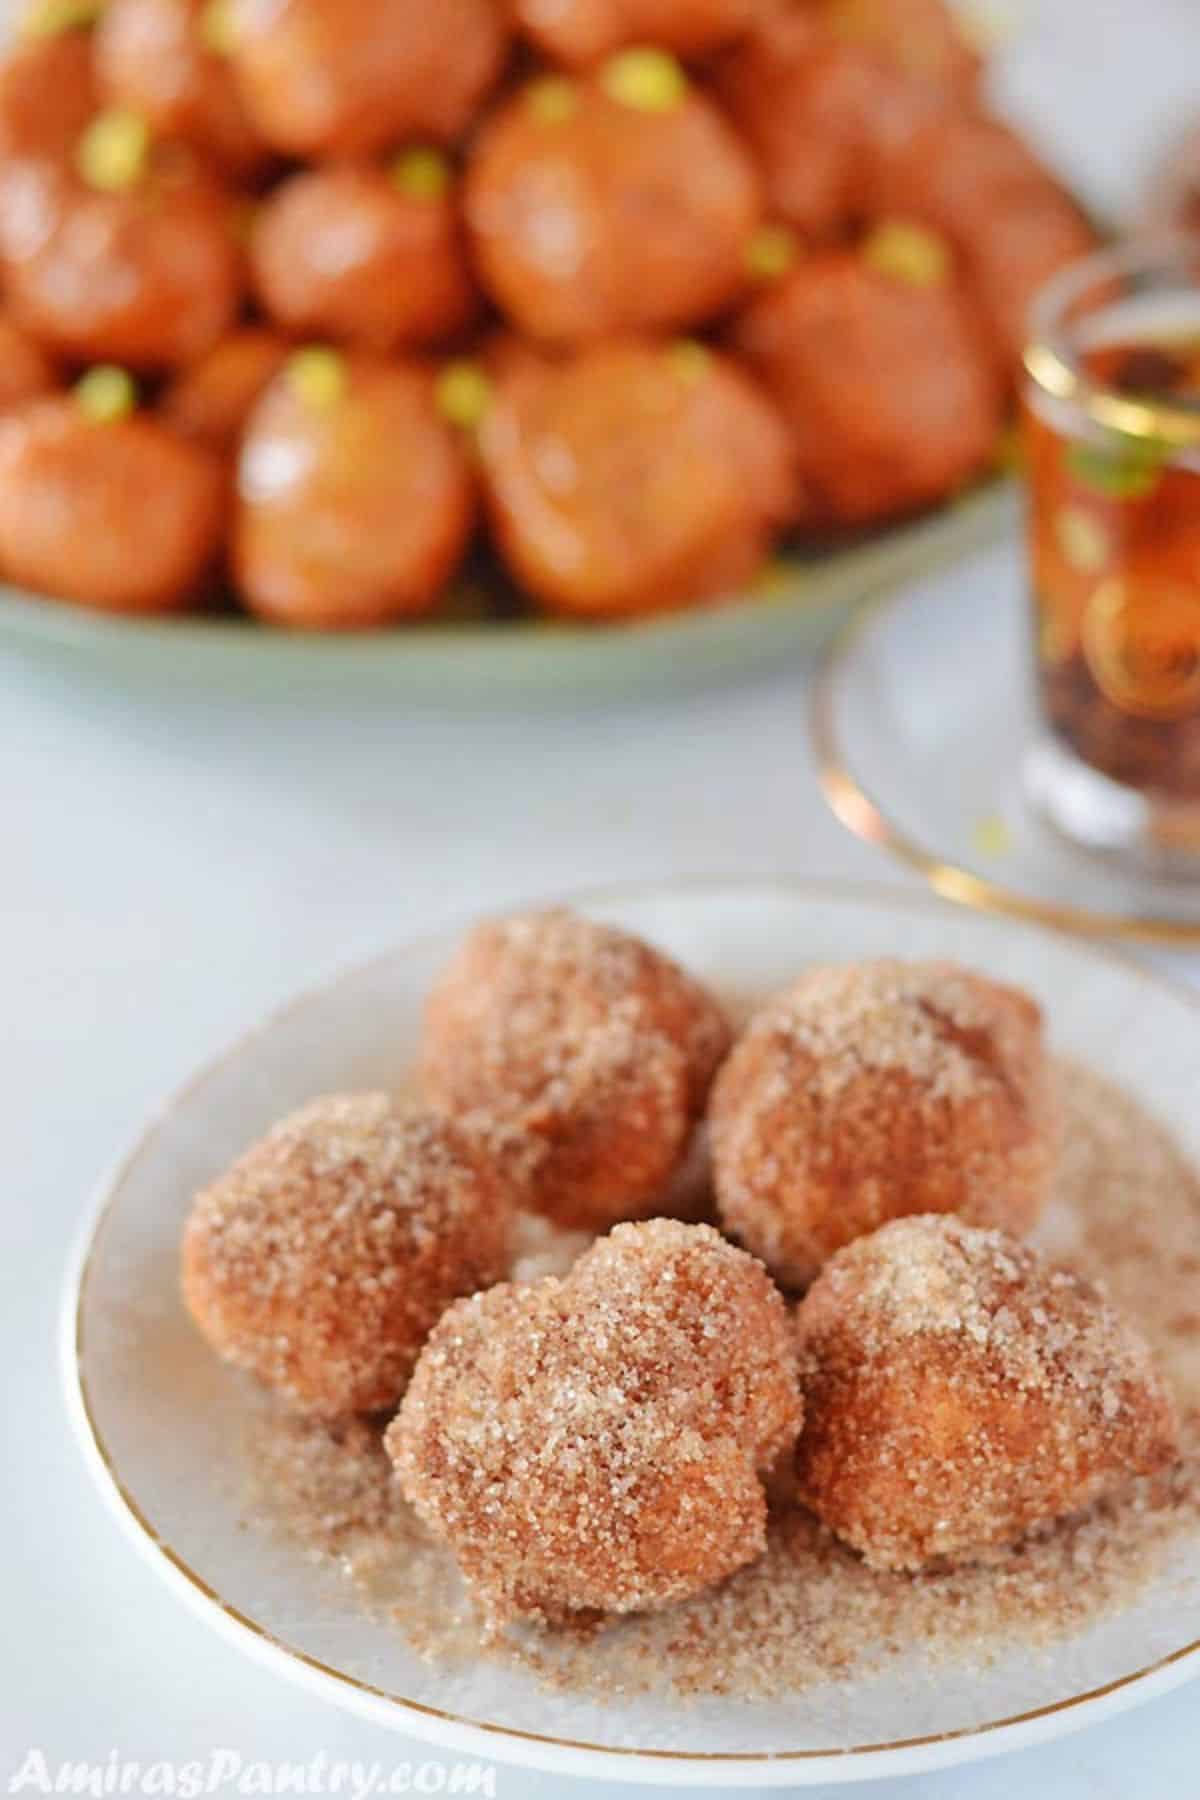 A dessert plate with lokma balls dusted in cinnamon sugar.